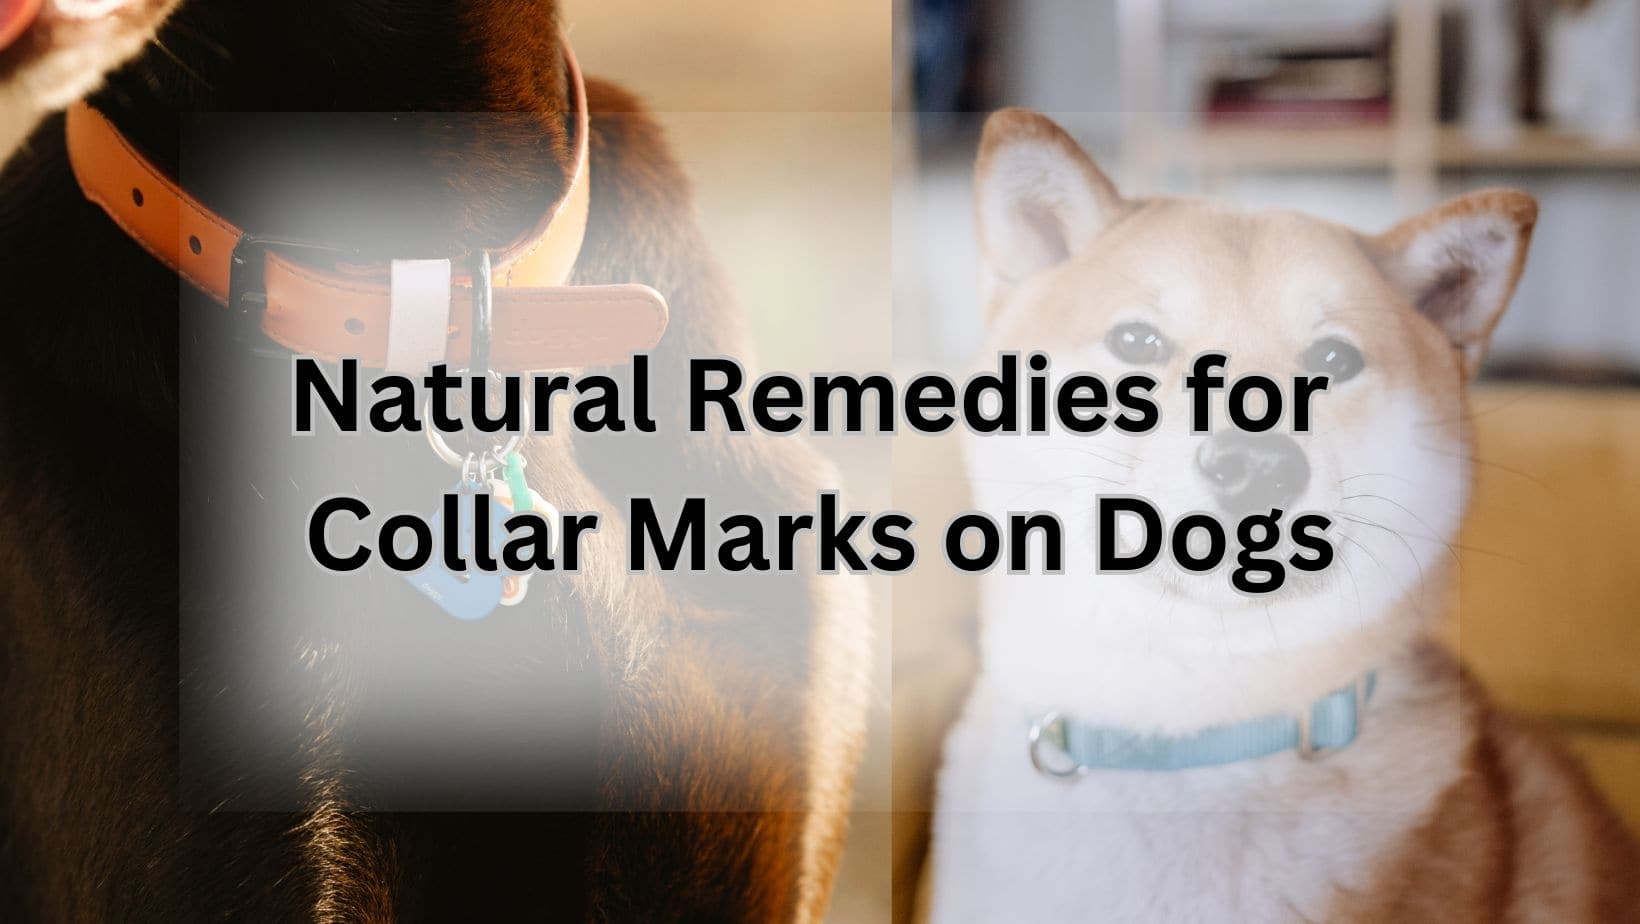 Collar Marks on Dogs